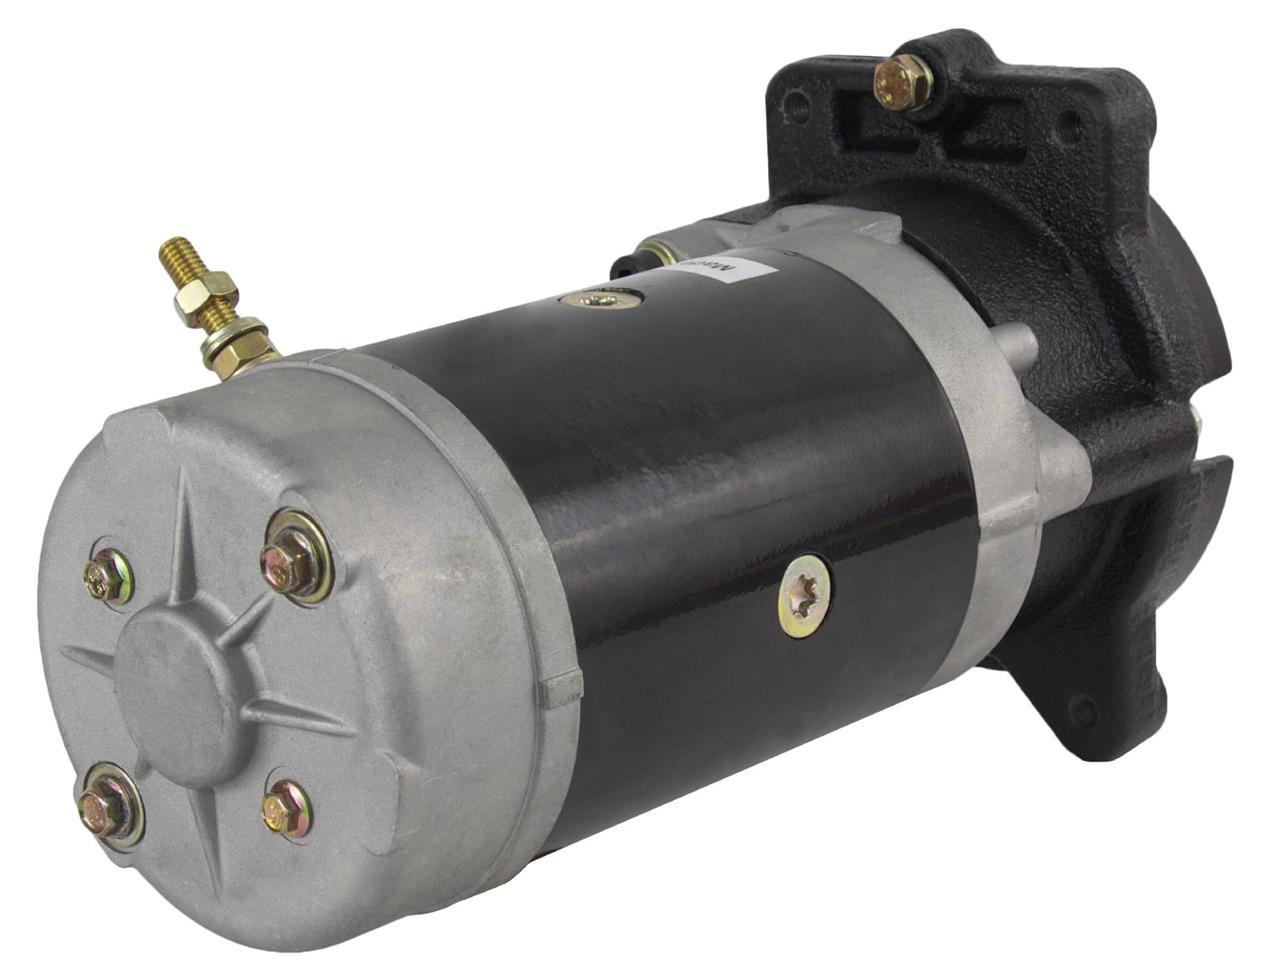 Rareelectrical 24V POWER STEERING PUMP MOTOR COMPATIBLE WITH KOMATSU ARTICULATED DUMP TRUCK HM400-2 HM400-3R 4216232700, 0510003040 03510019